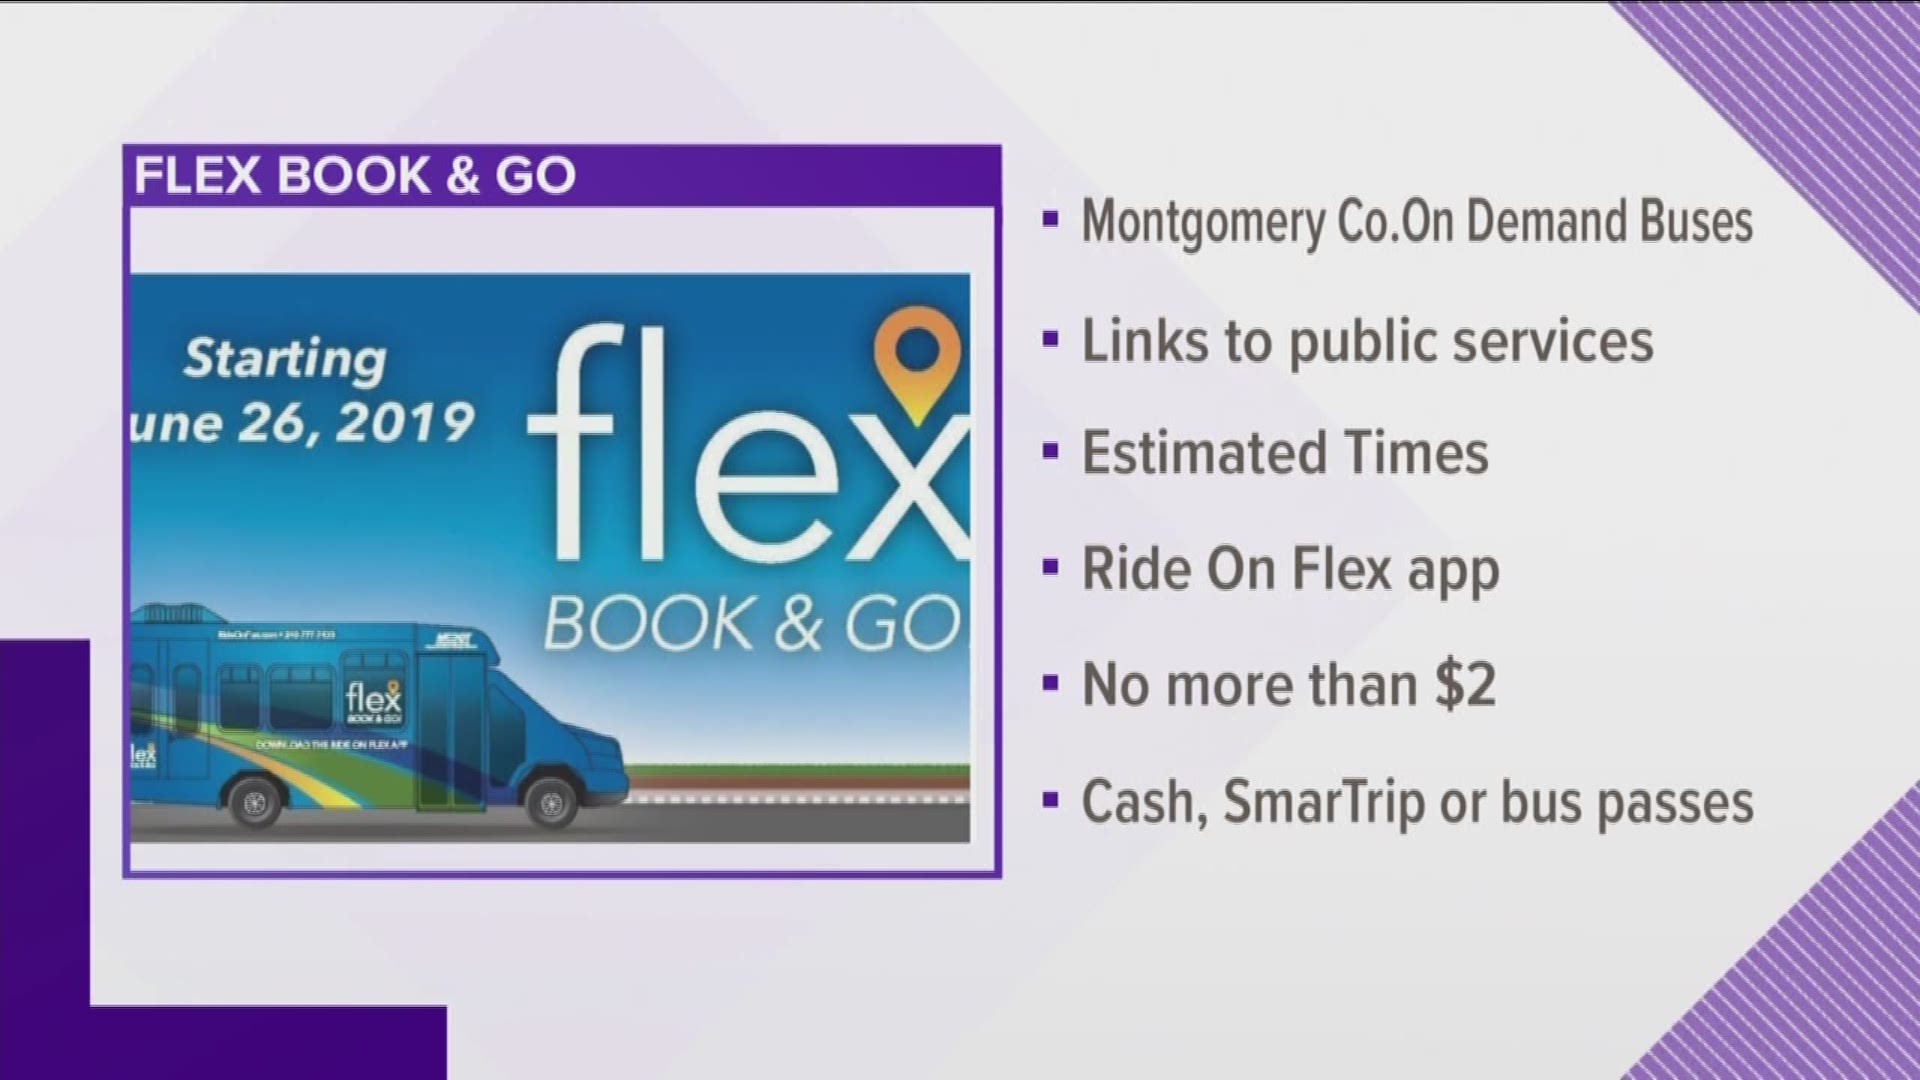 A new low-cost public transportation service just  debuted in Montgomery County. The Ride On Flex program will run "on-demand" buses in the Rockville and Glenmont/Wheaton areas. The service connects residents with Transit hubs, Commercial centers and Public services.